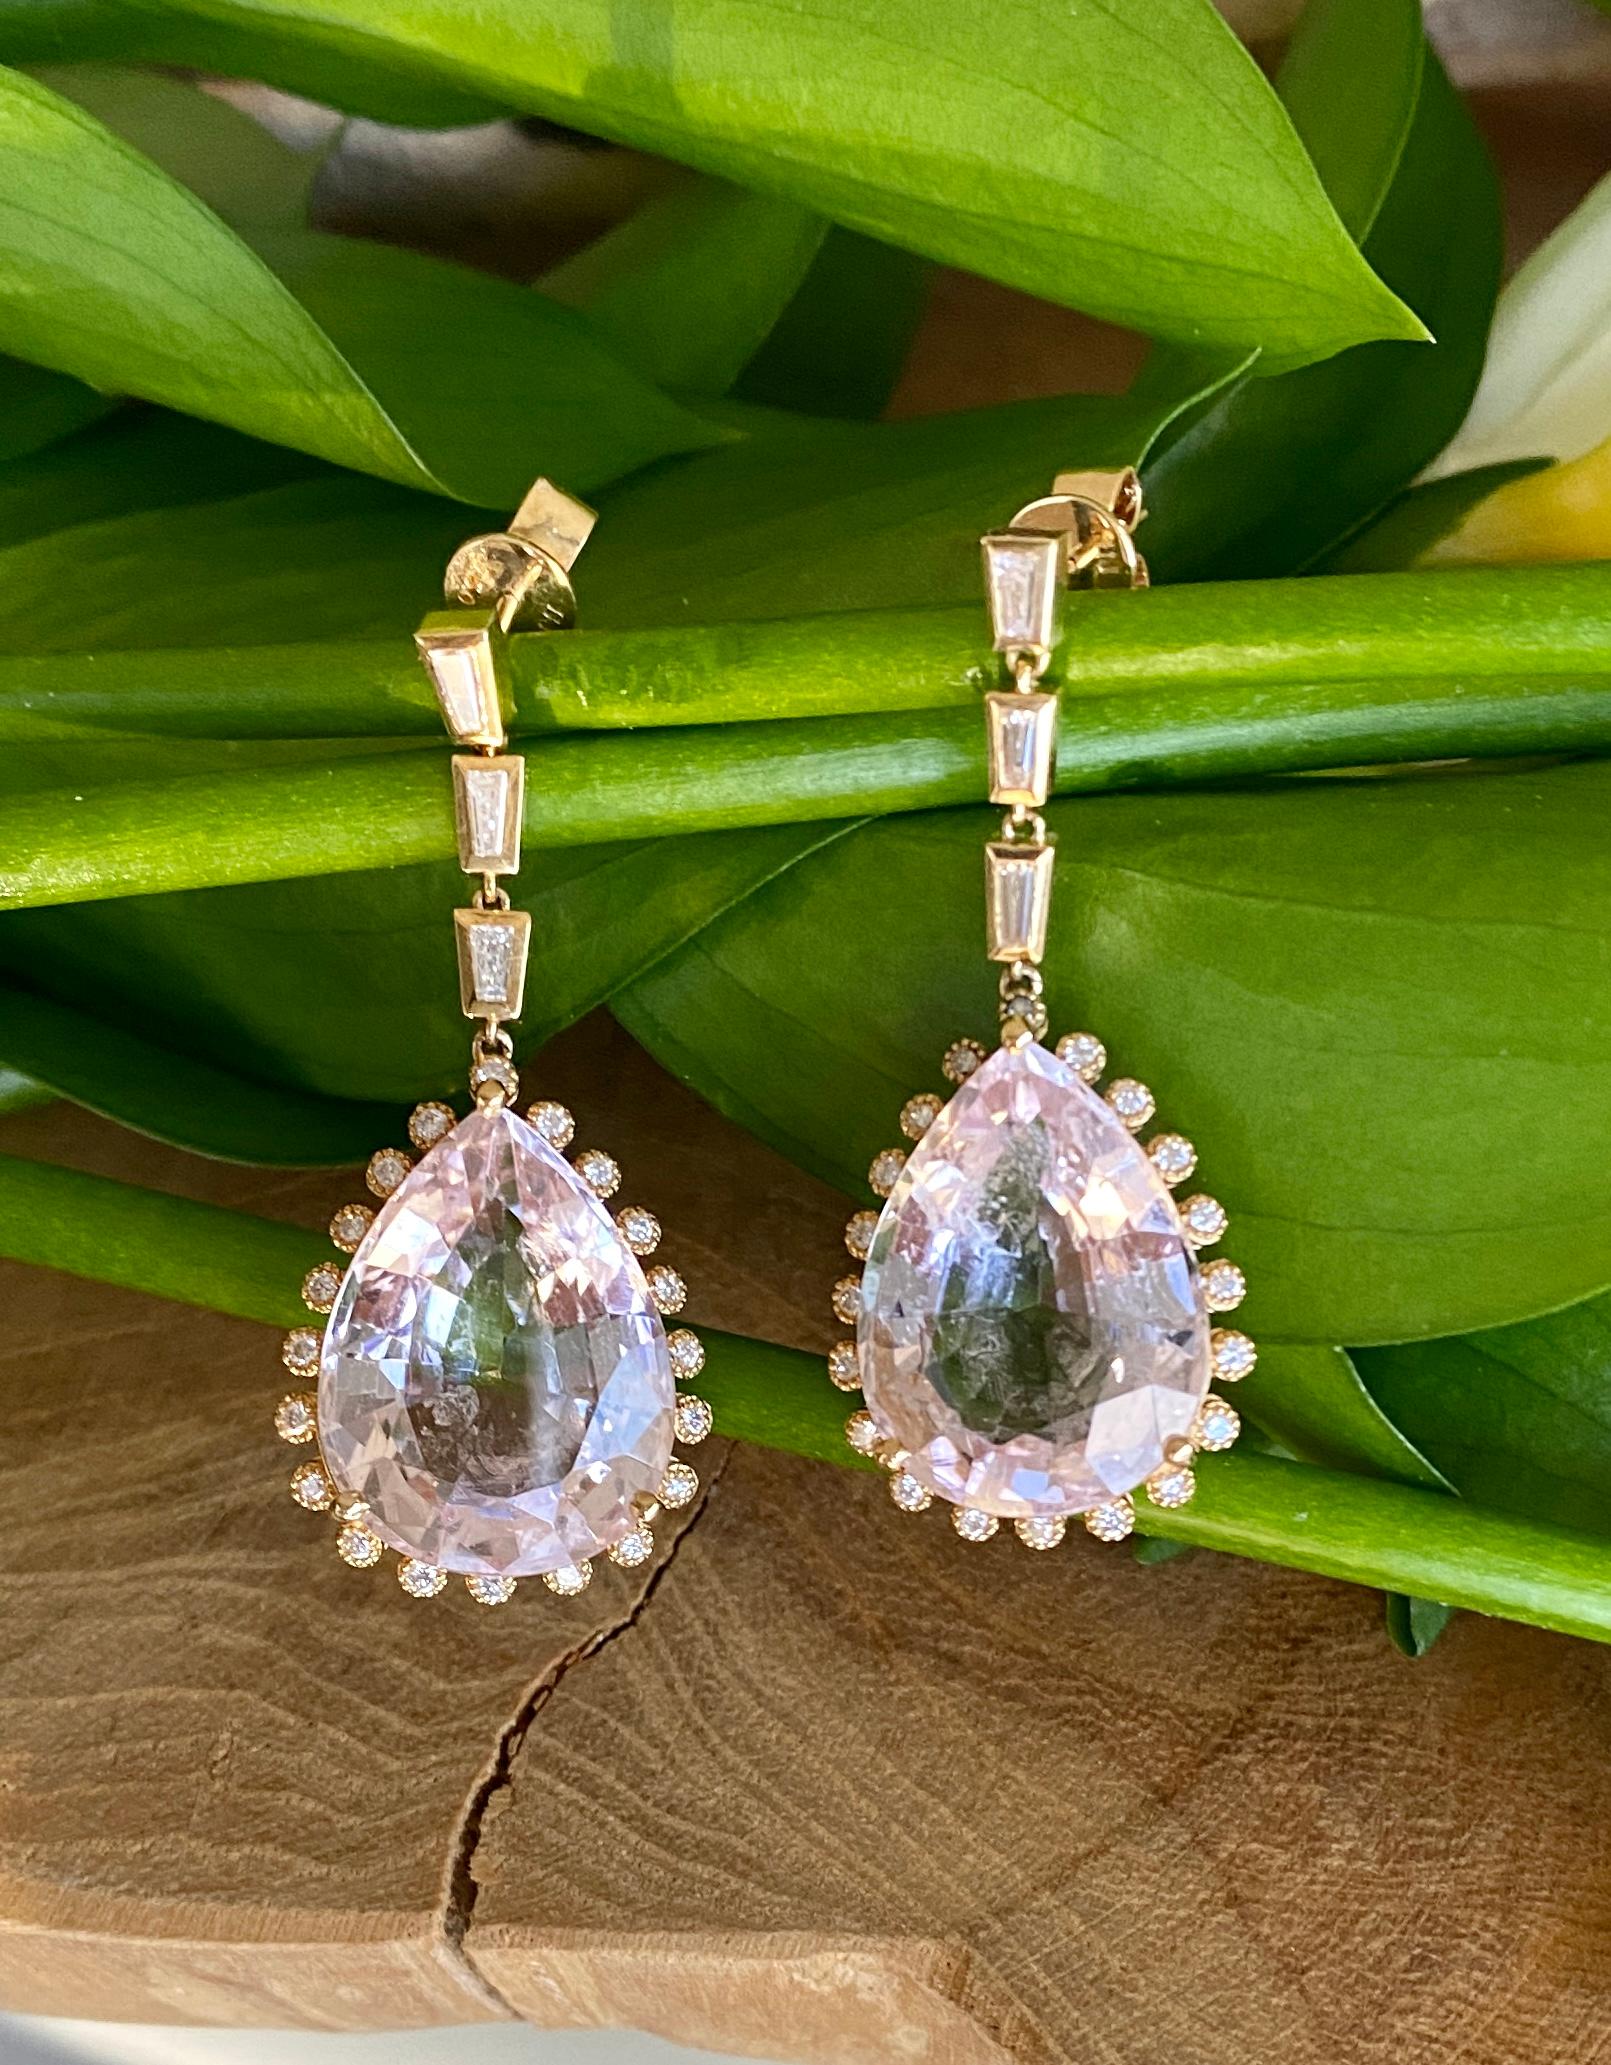 Teardrop shaped faceted morganites surrounded by round diamond accents and dangling on a trio of tapered diamond baguettes, handcrafted in 18 Karat yellow gold.

These stunningly elegant morganite and diamond earrings are the perfect holiday jewels.